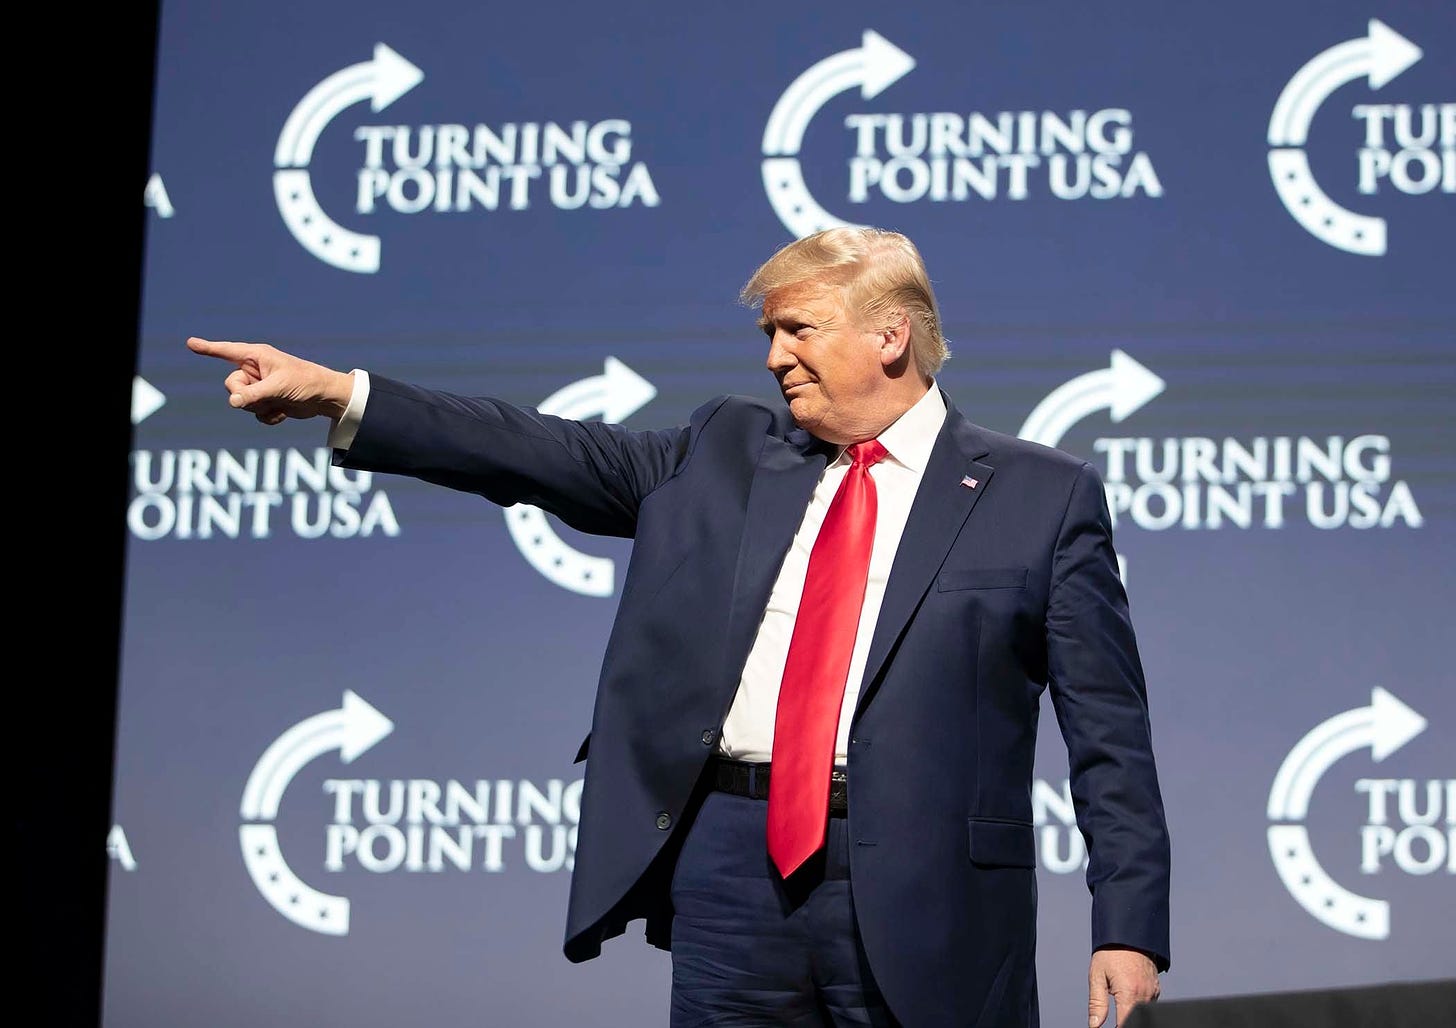 Turning Point USA: Will A-list conservative speakers admit Trump lost?